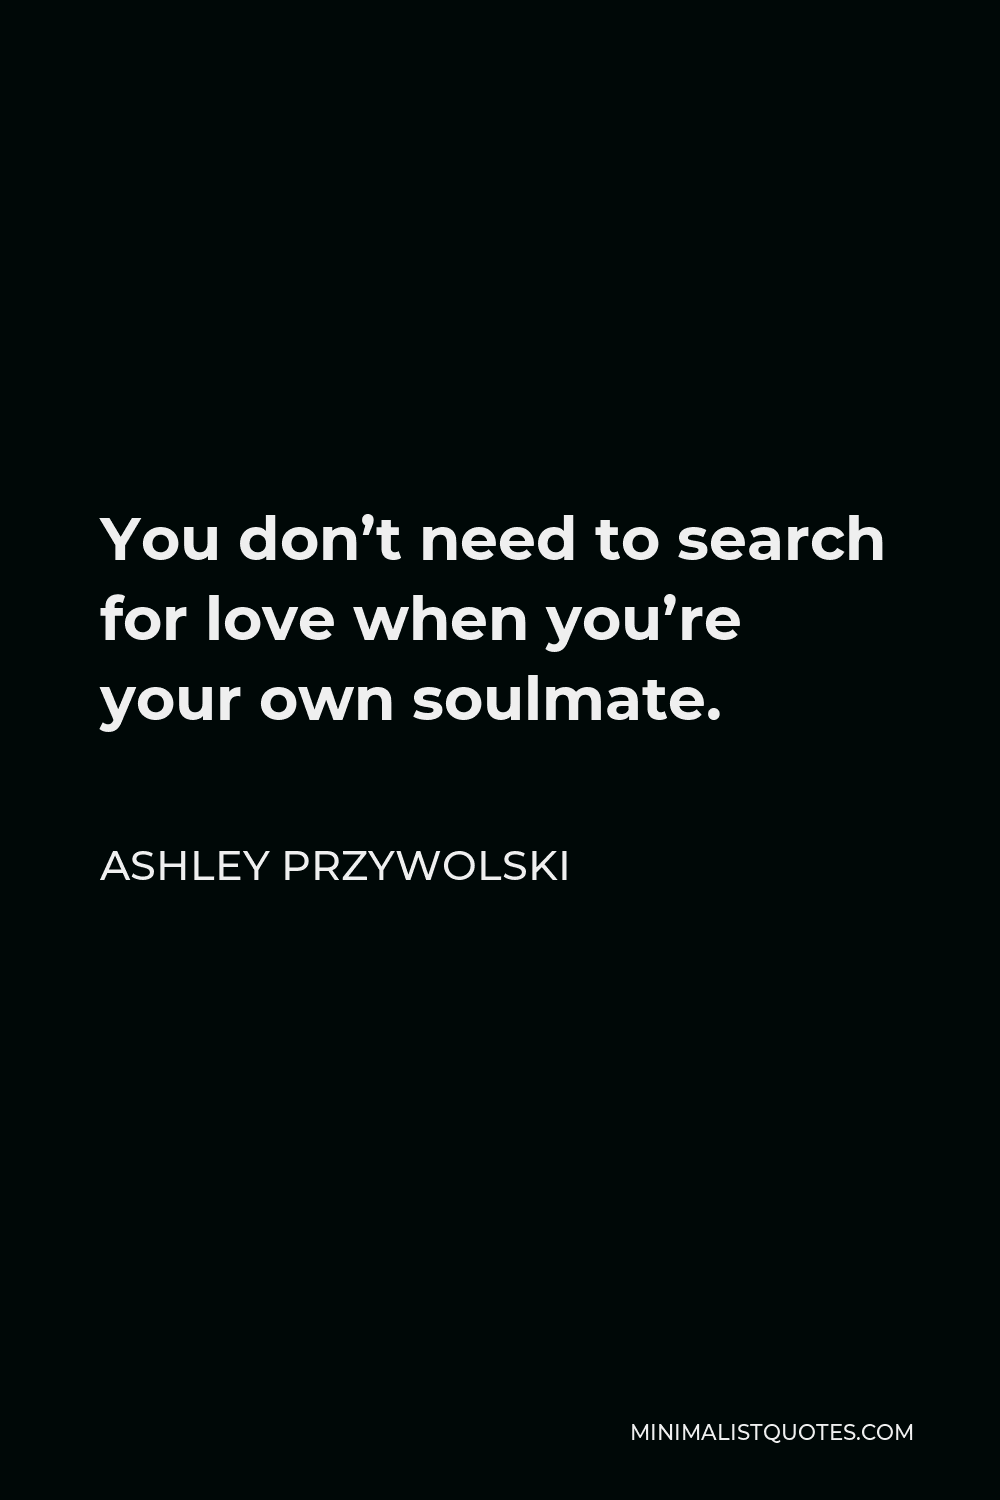 Ashley Przywolski Quote - You don’t need to search for love when you’re your own soulmate.